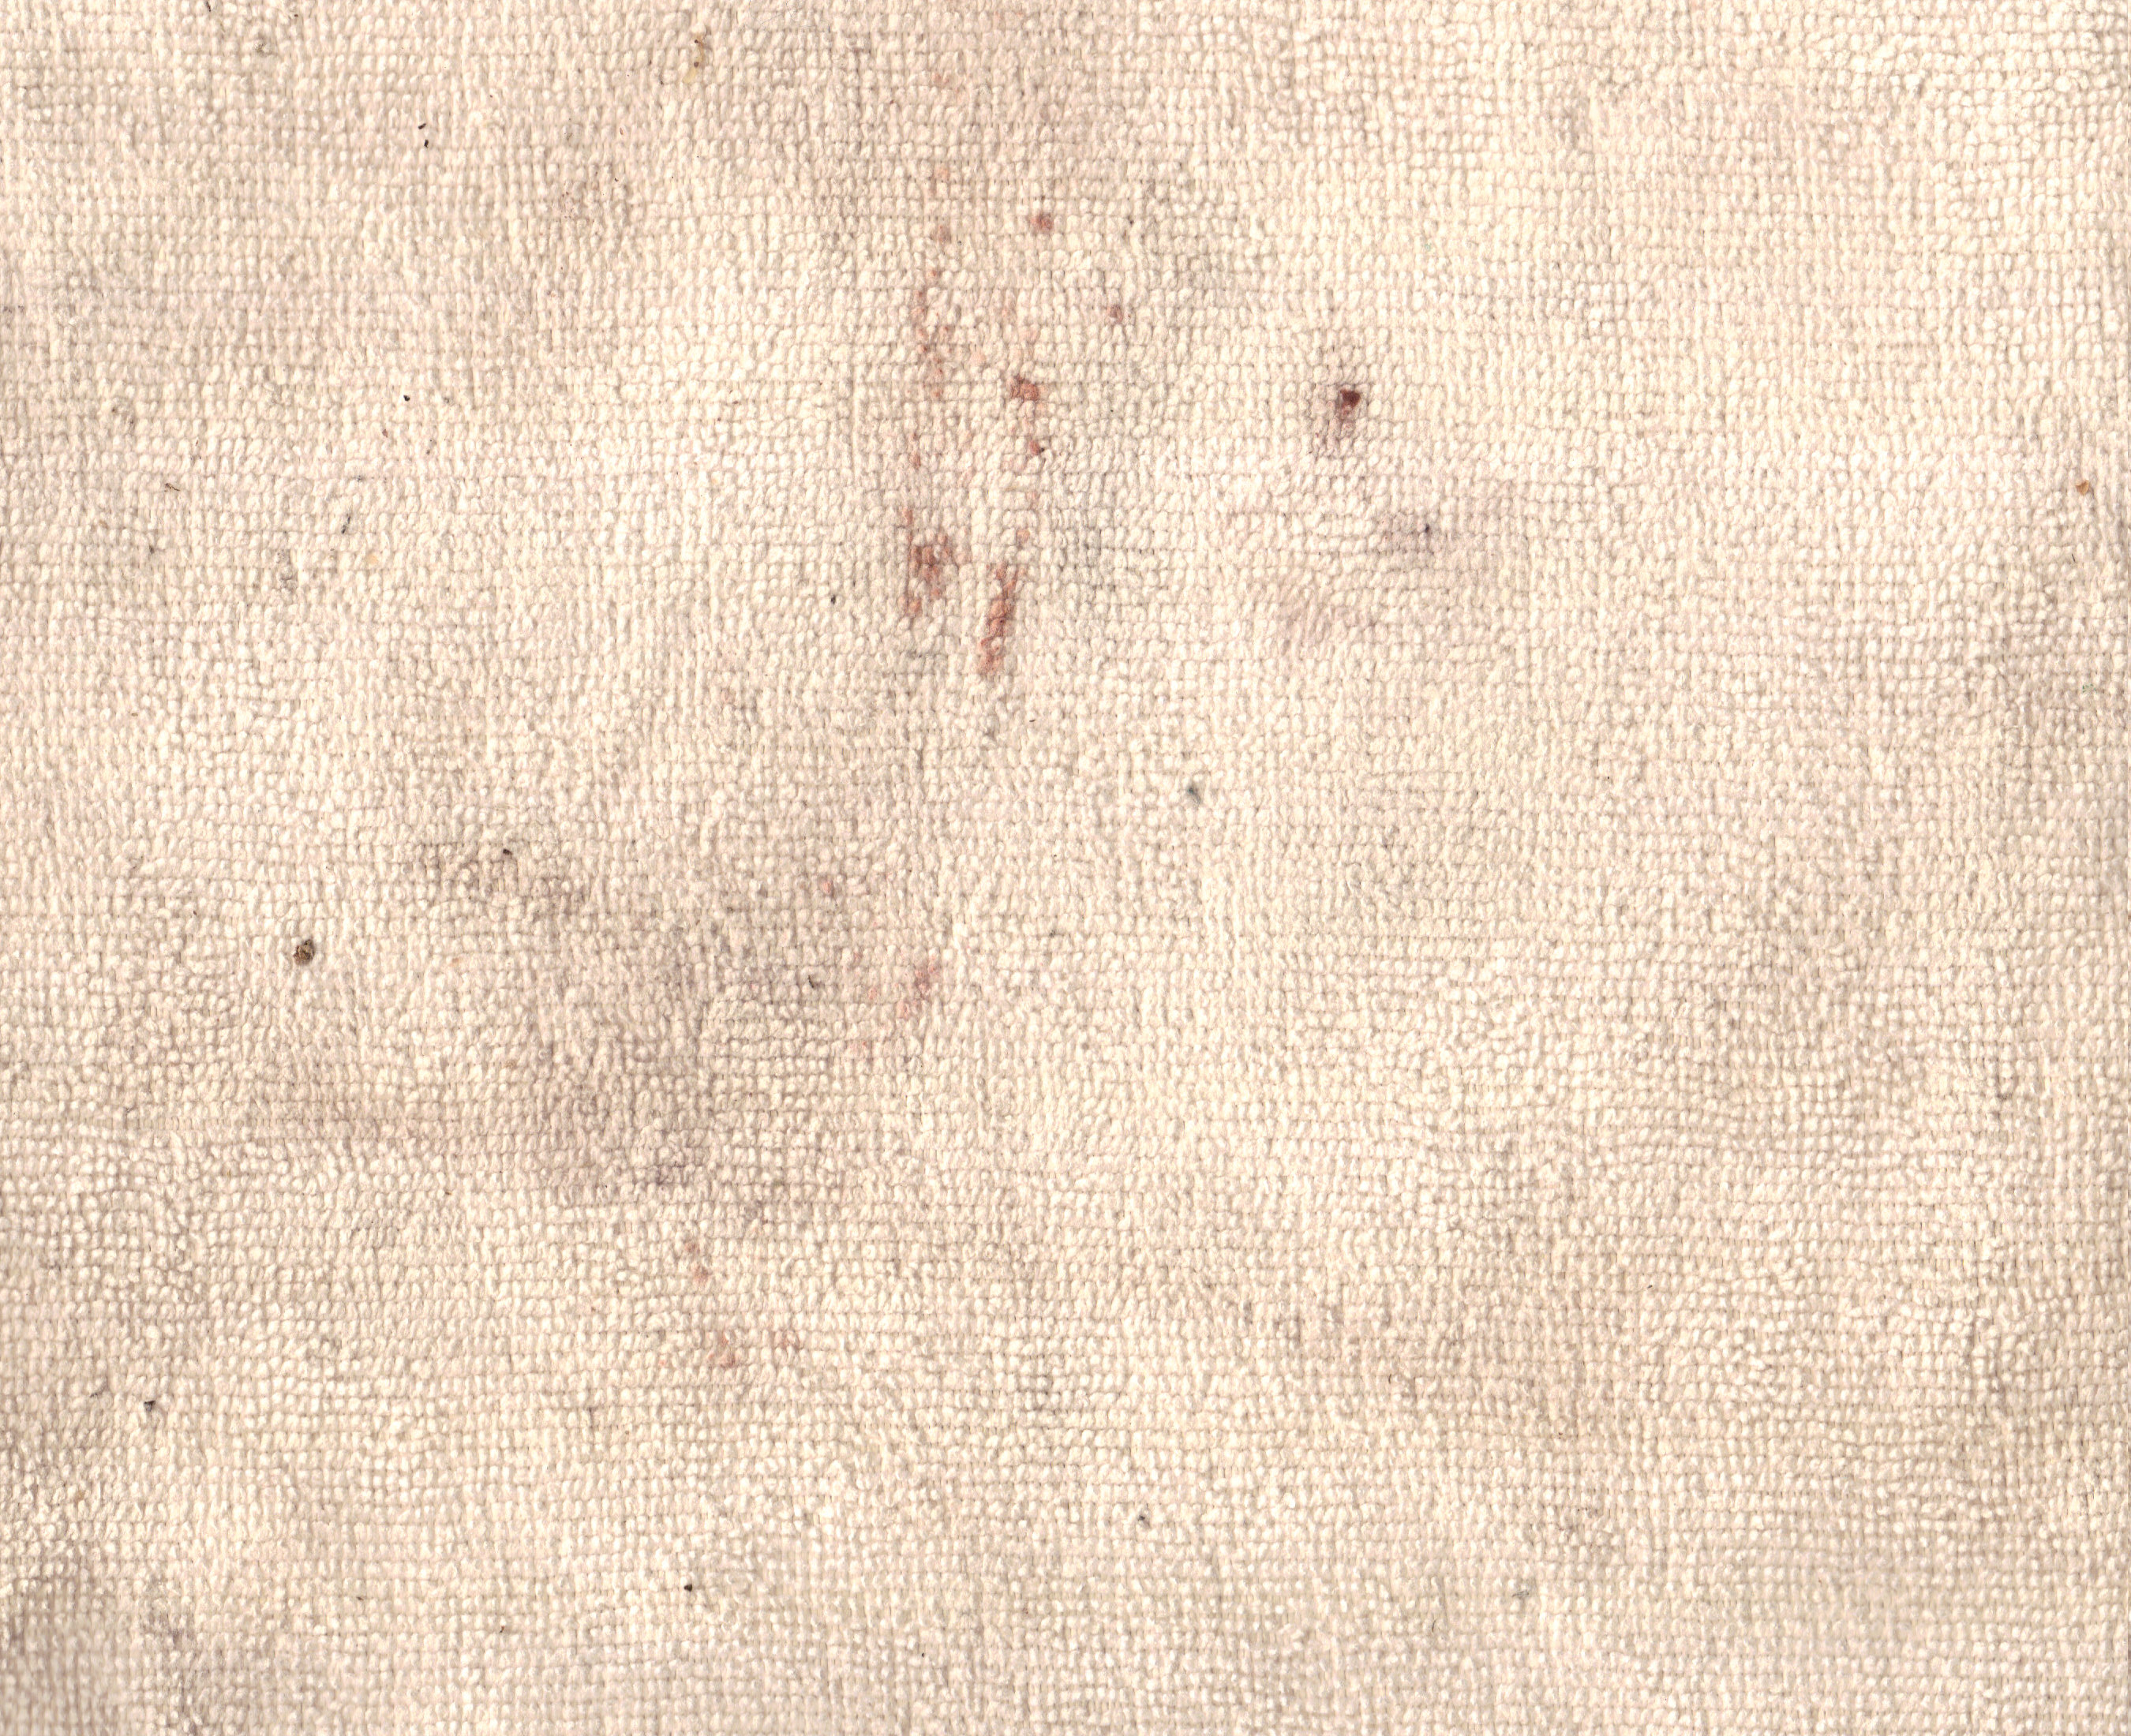 Dirty fabric texture photo